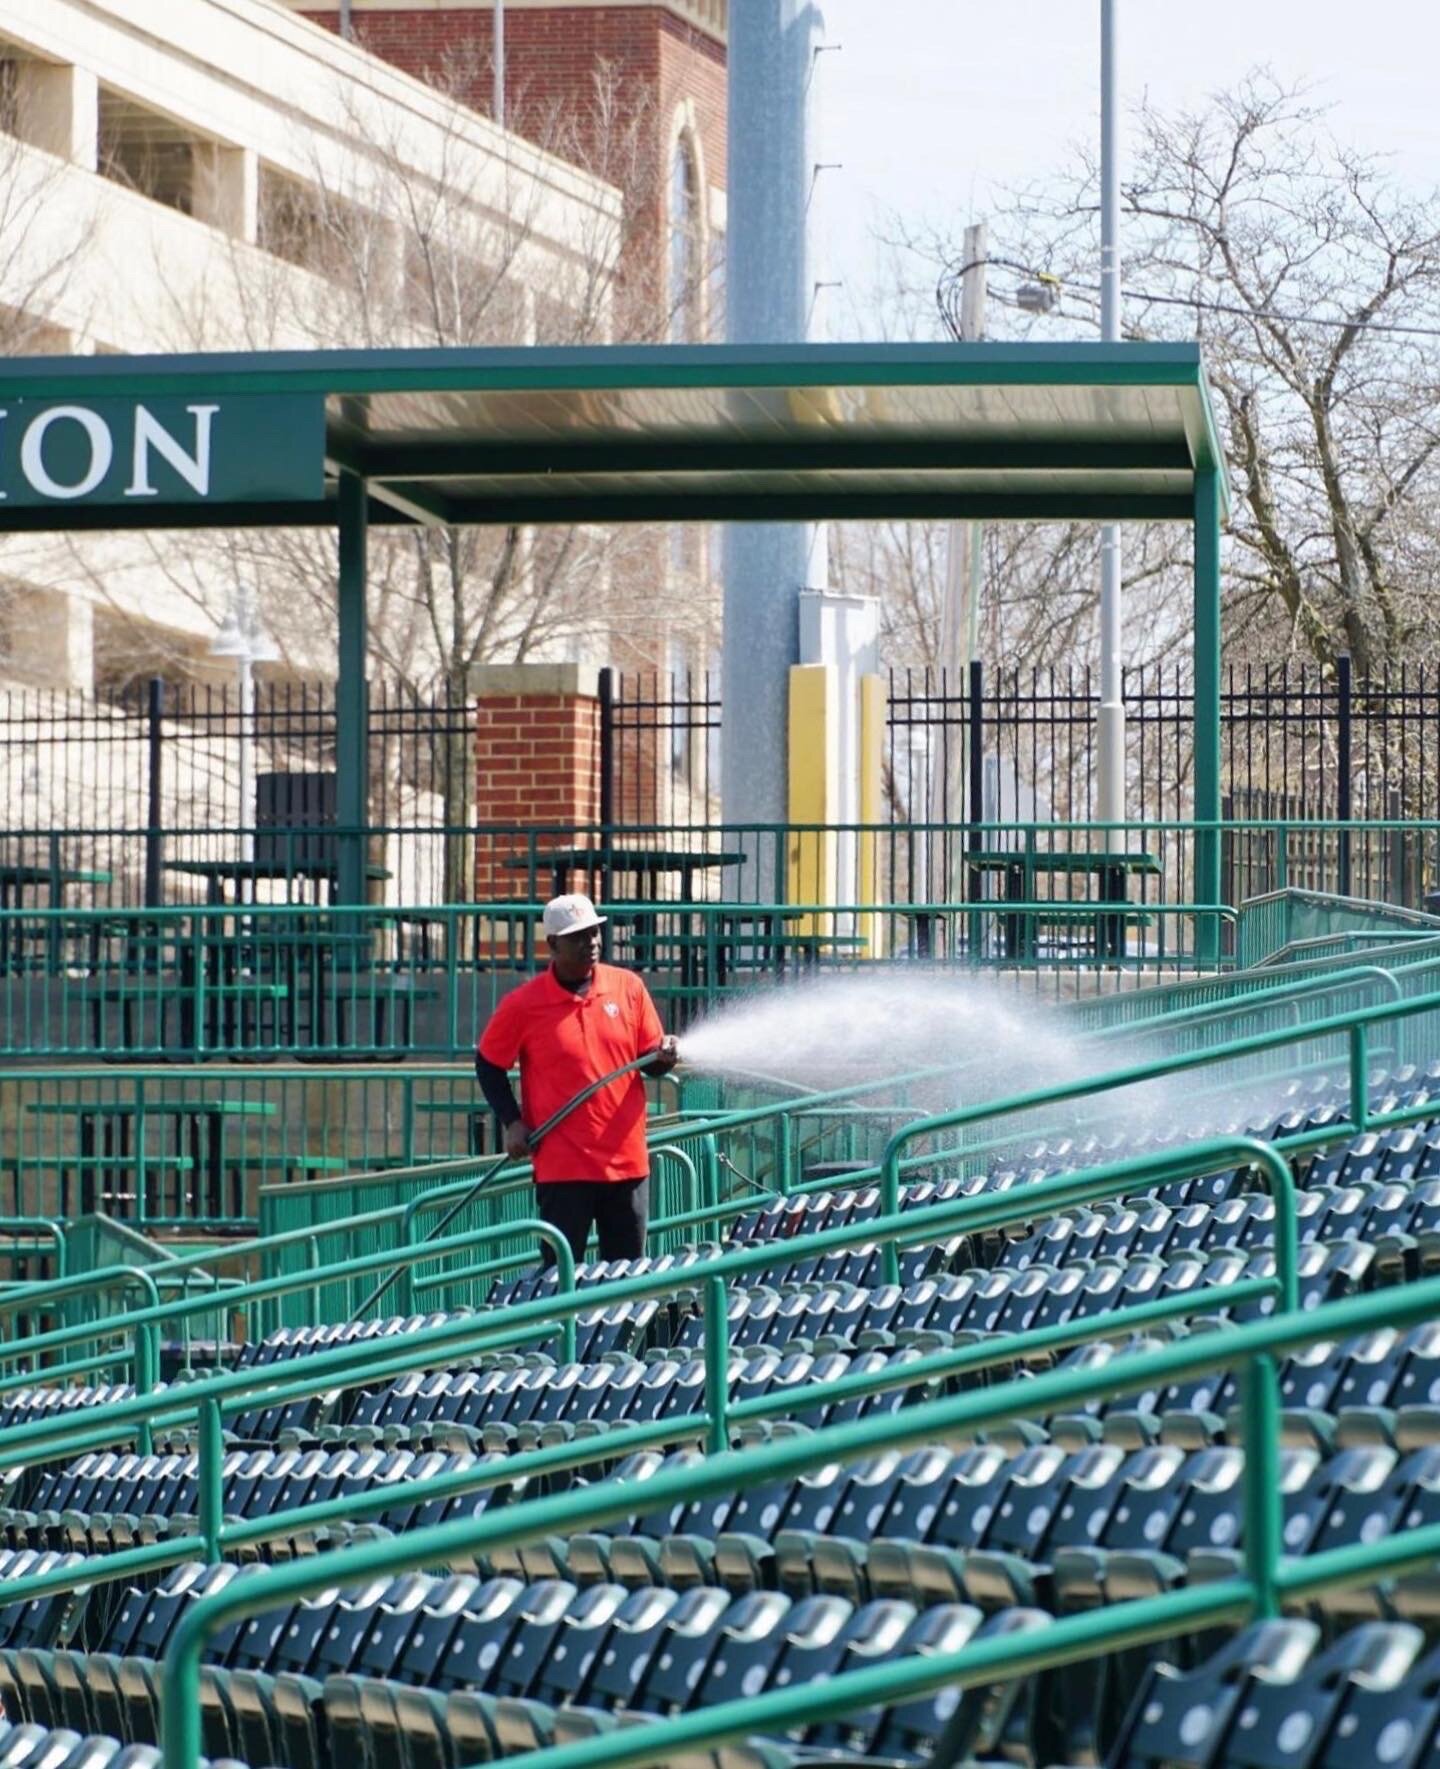 Parkview Field employees prepare the ballpark for opening day.